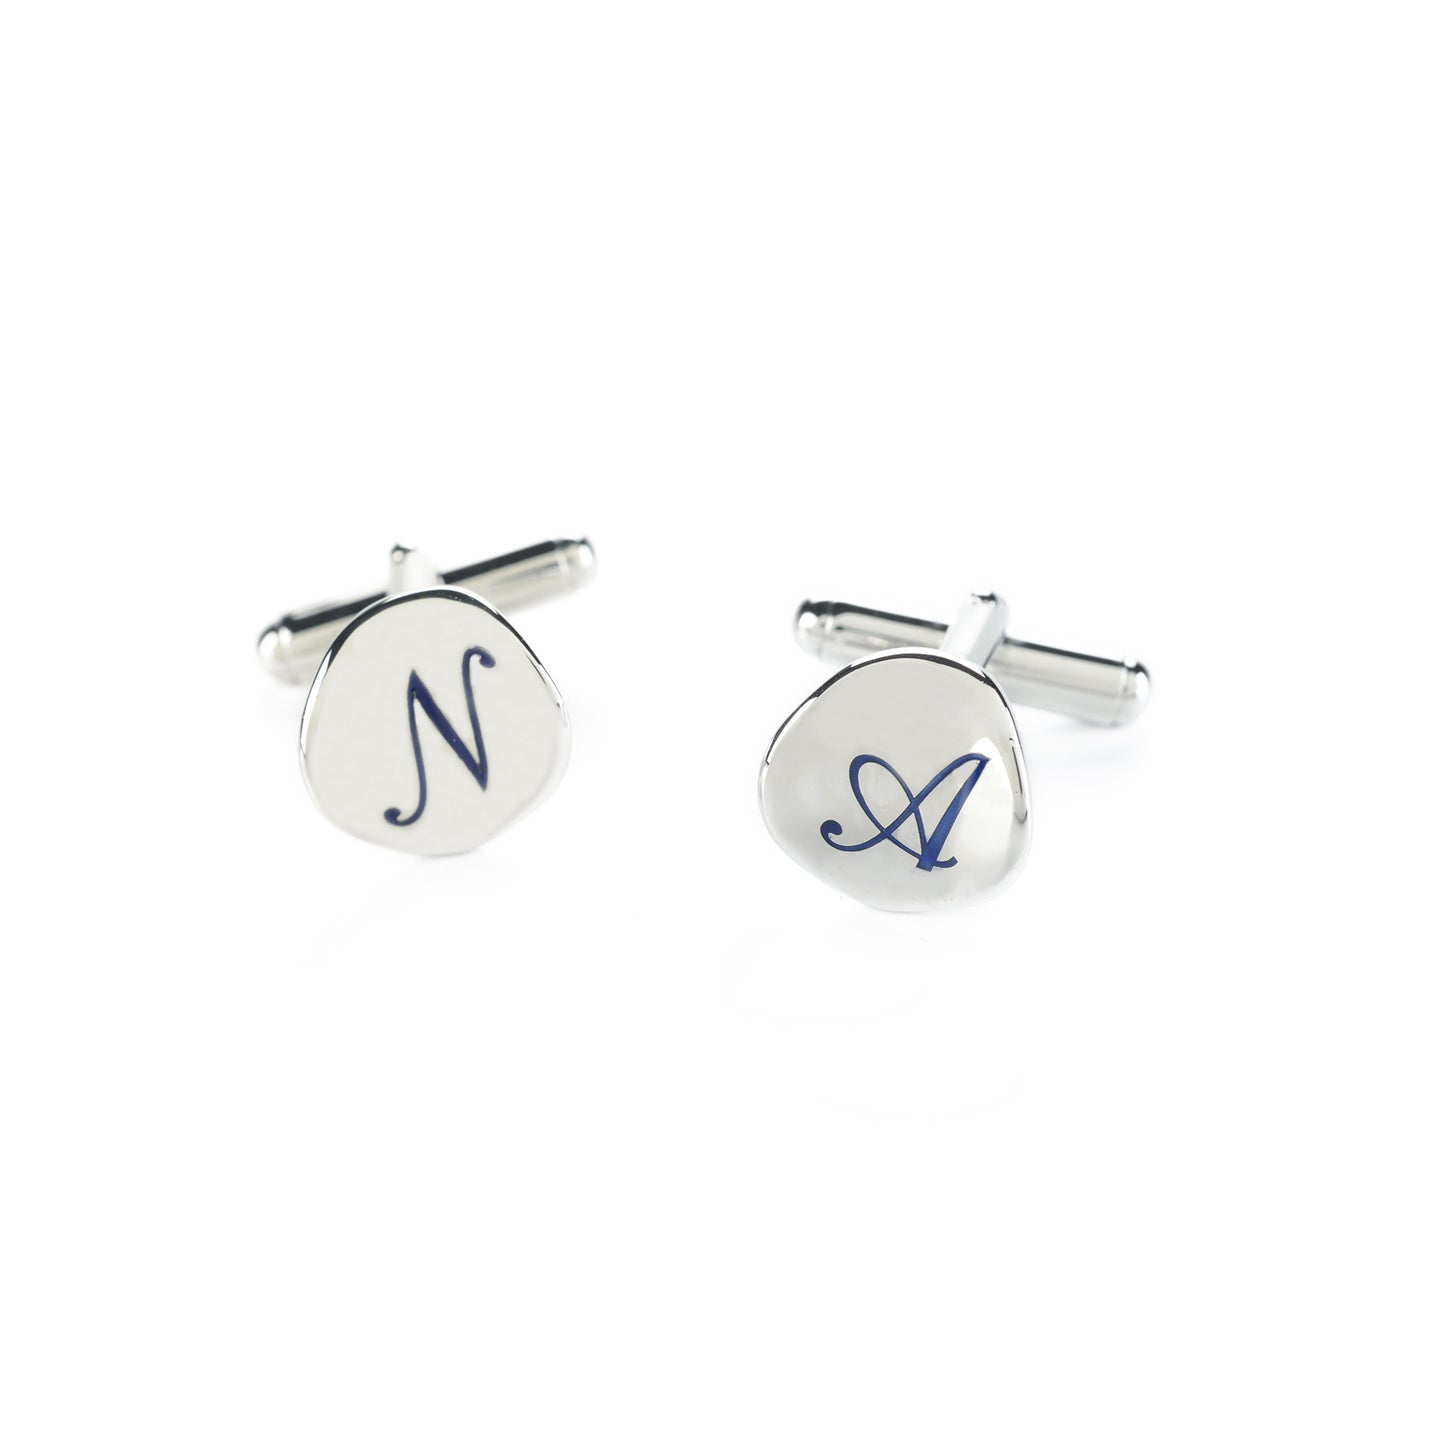 Customizable circle cufflinks in sterling silver 